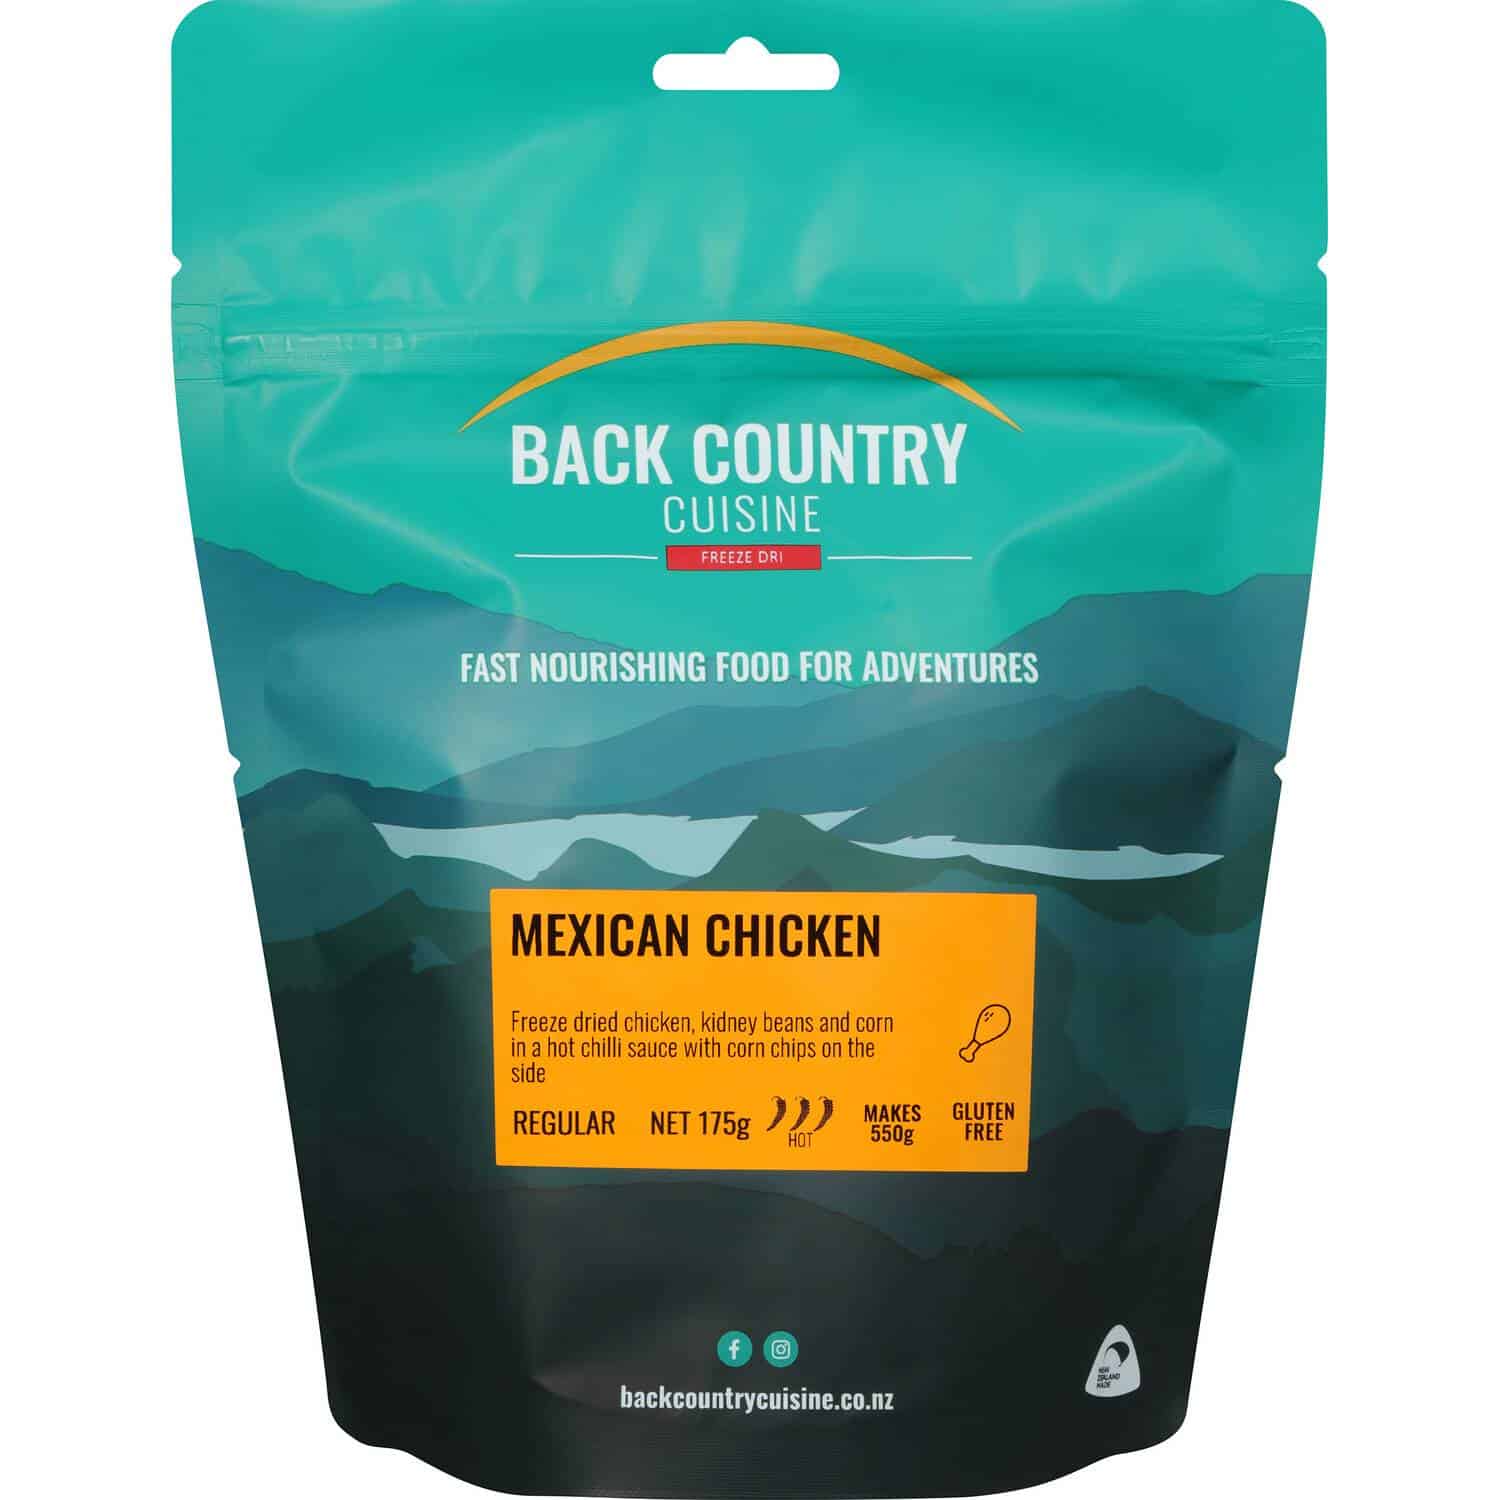 Back Country Cuisine Mexican Chicken Regular - Tramping Food and Accessories sold by Venture Outdoors NZ